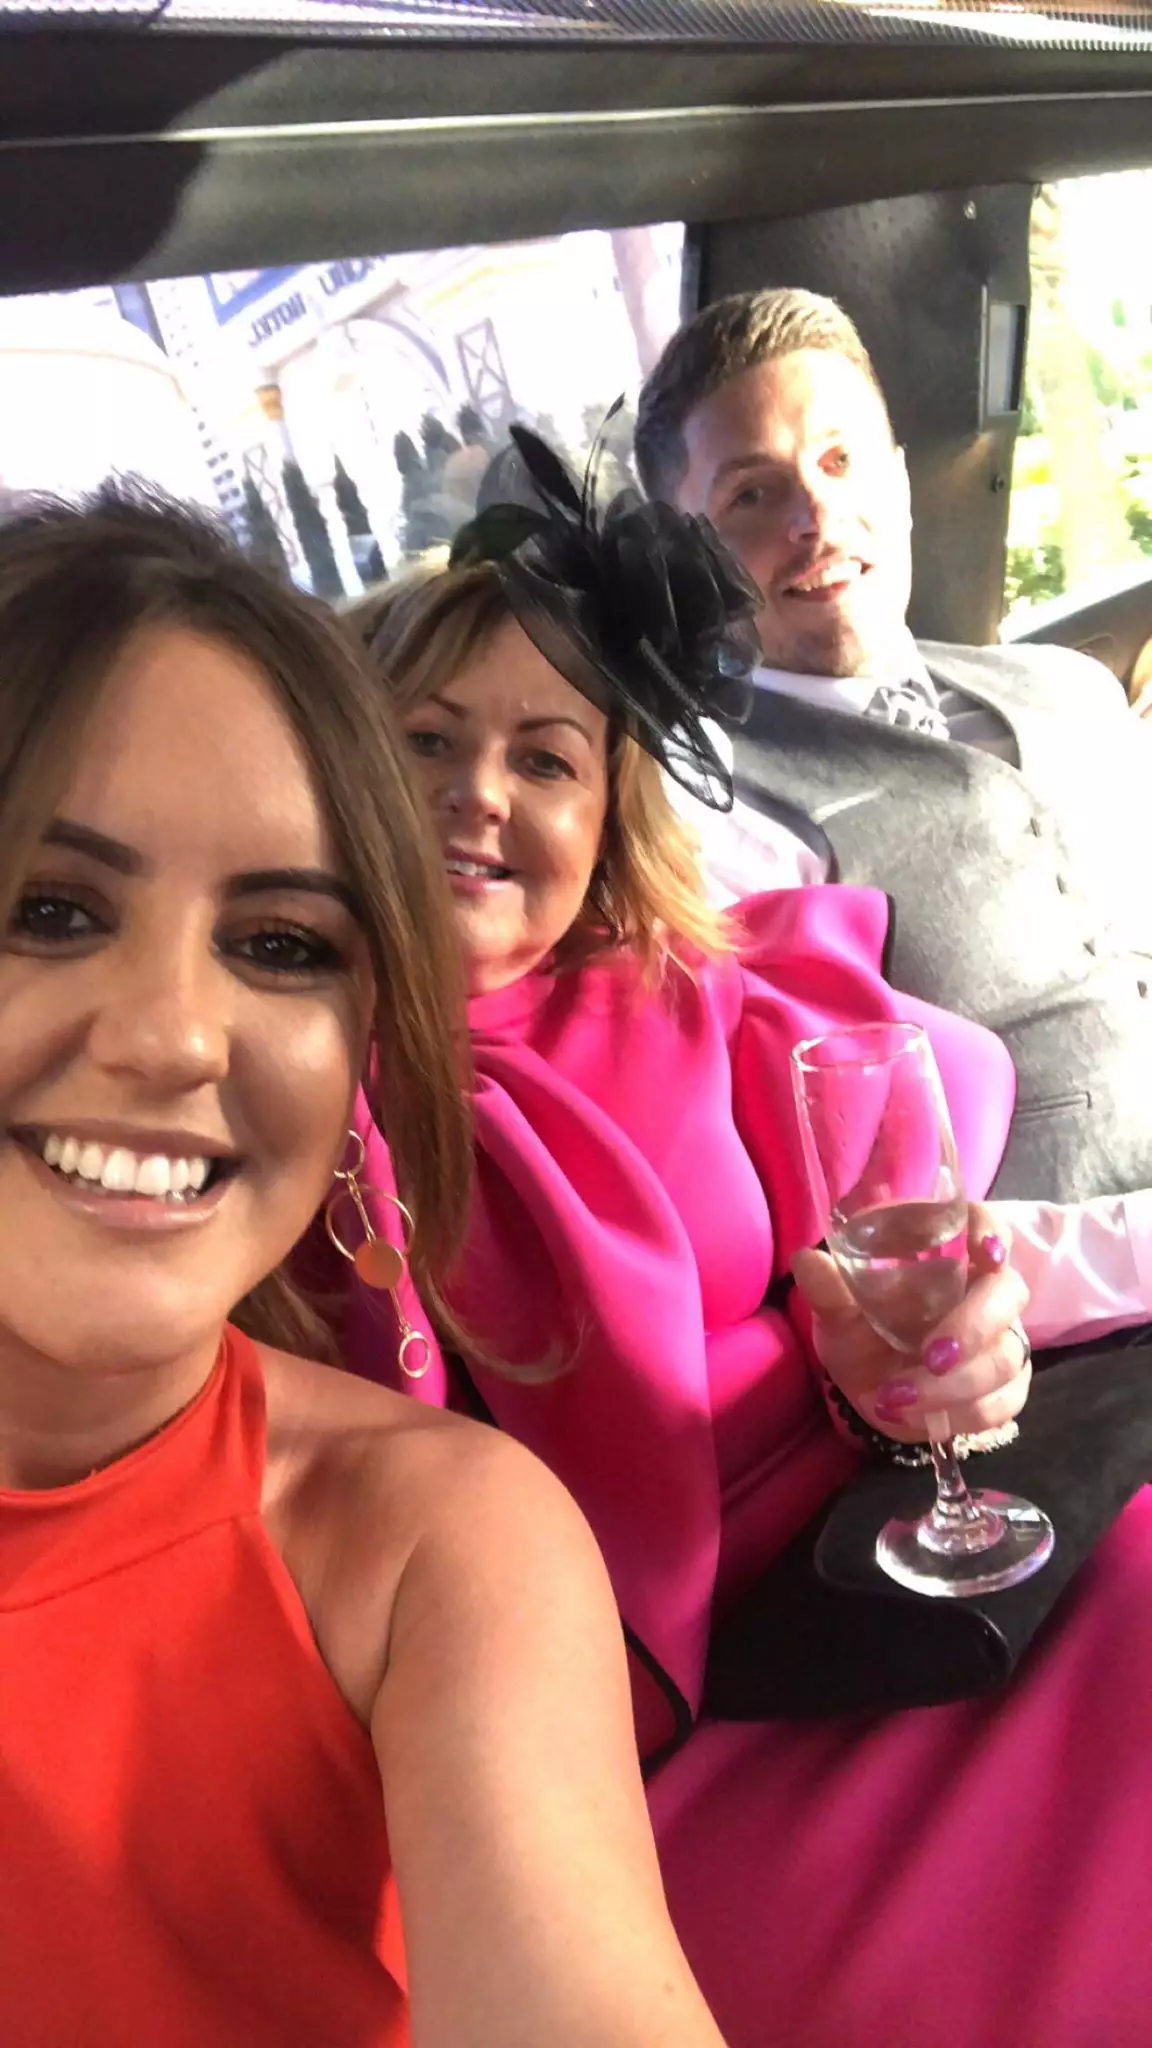 Ashleigh MacLennan had been in Las Vegas with her family for her brother's wedding.